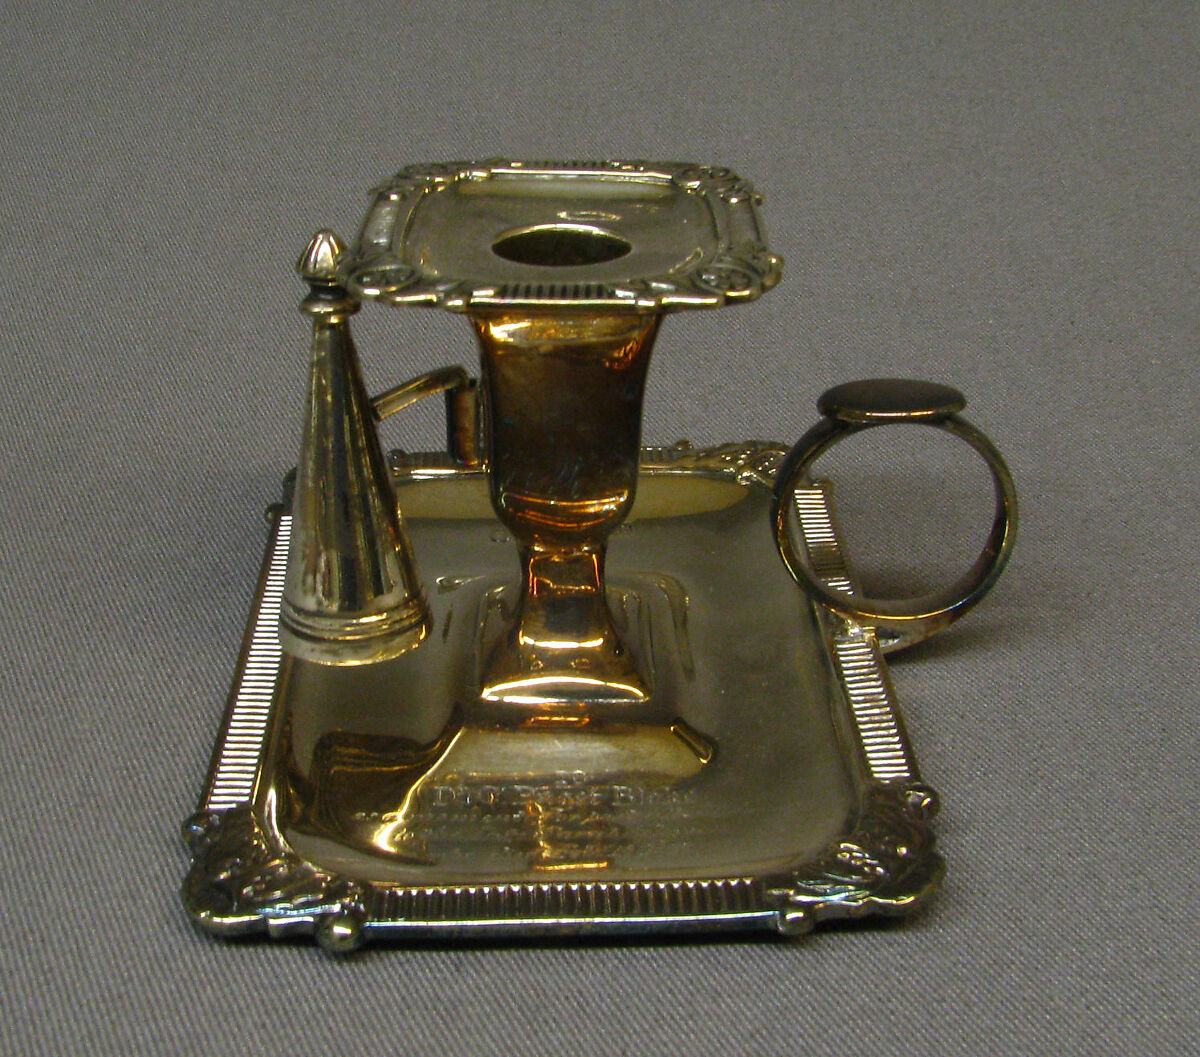 Chamber candlestick or taperstick, Charles Lias (active 1823– after 1846), Silver, British, London 